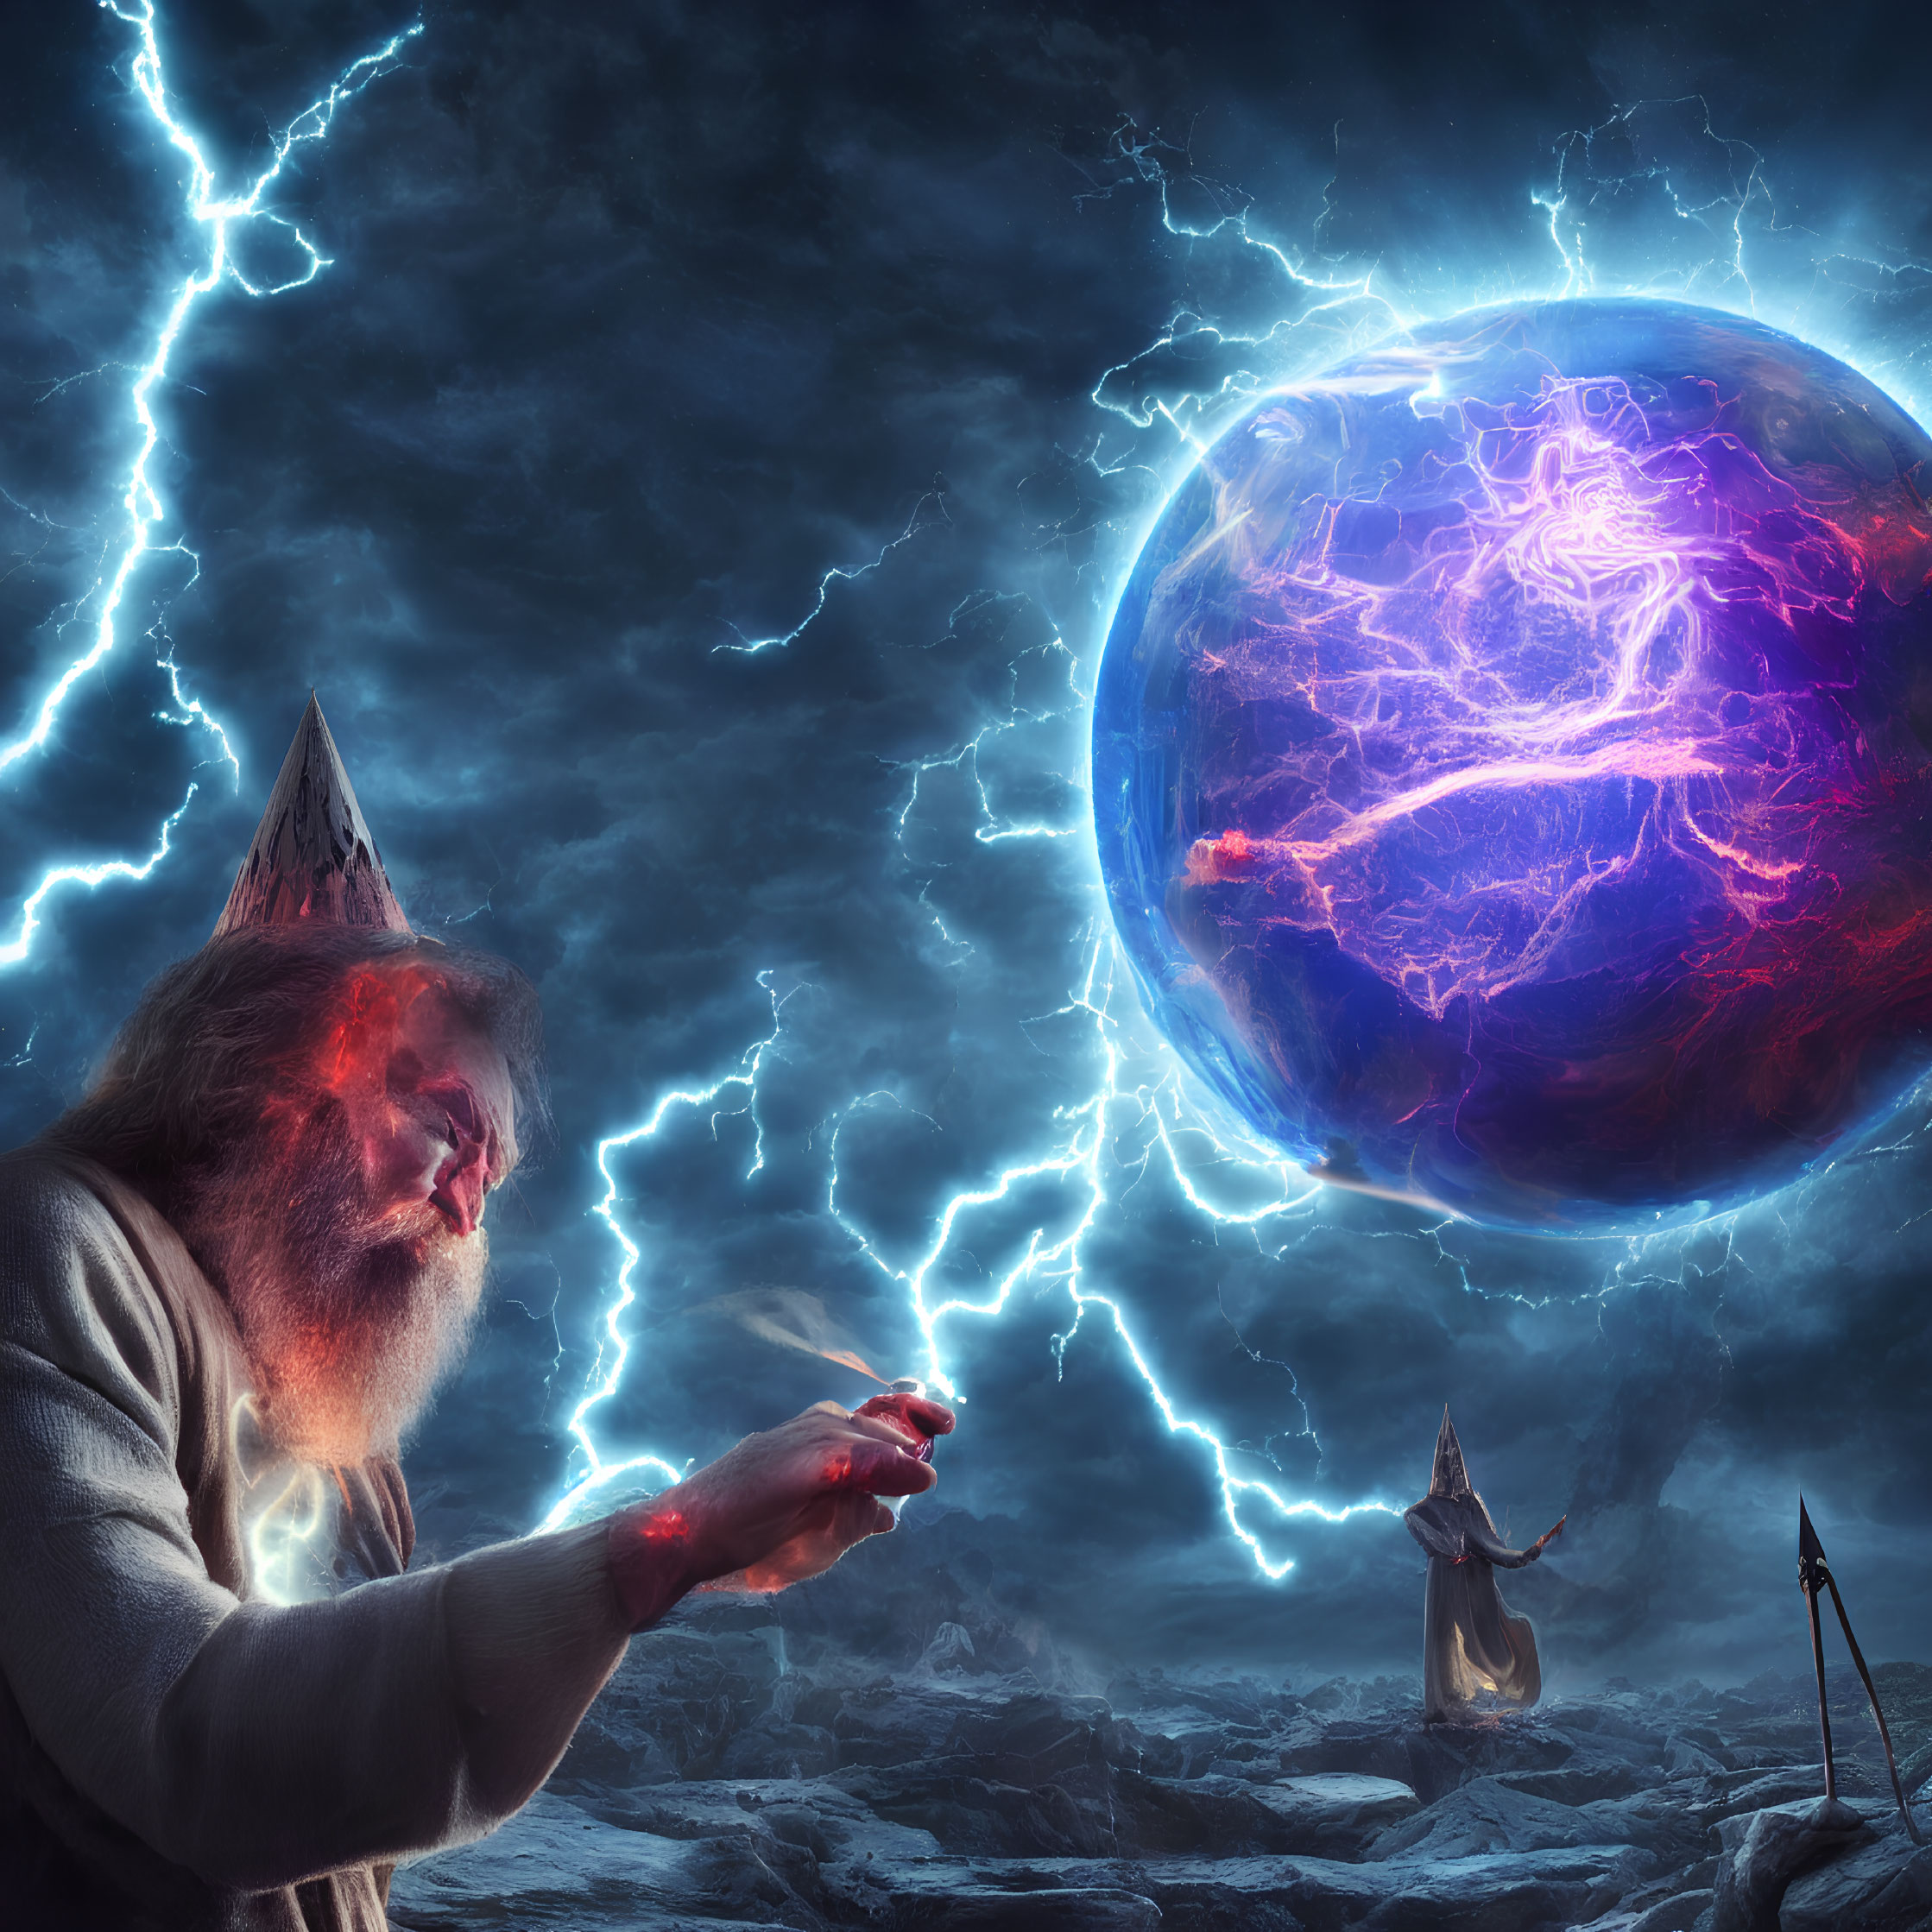 Wizard casting electrifying magic under stormy sky with glowing orb & another sorcerer.